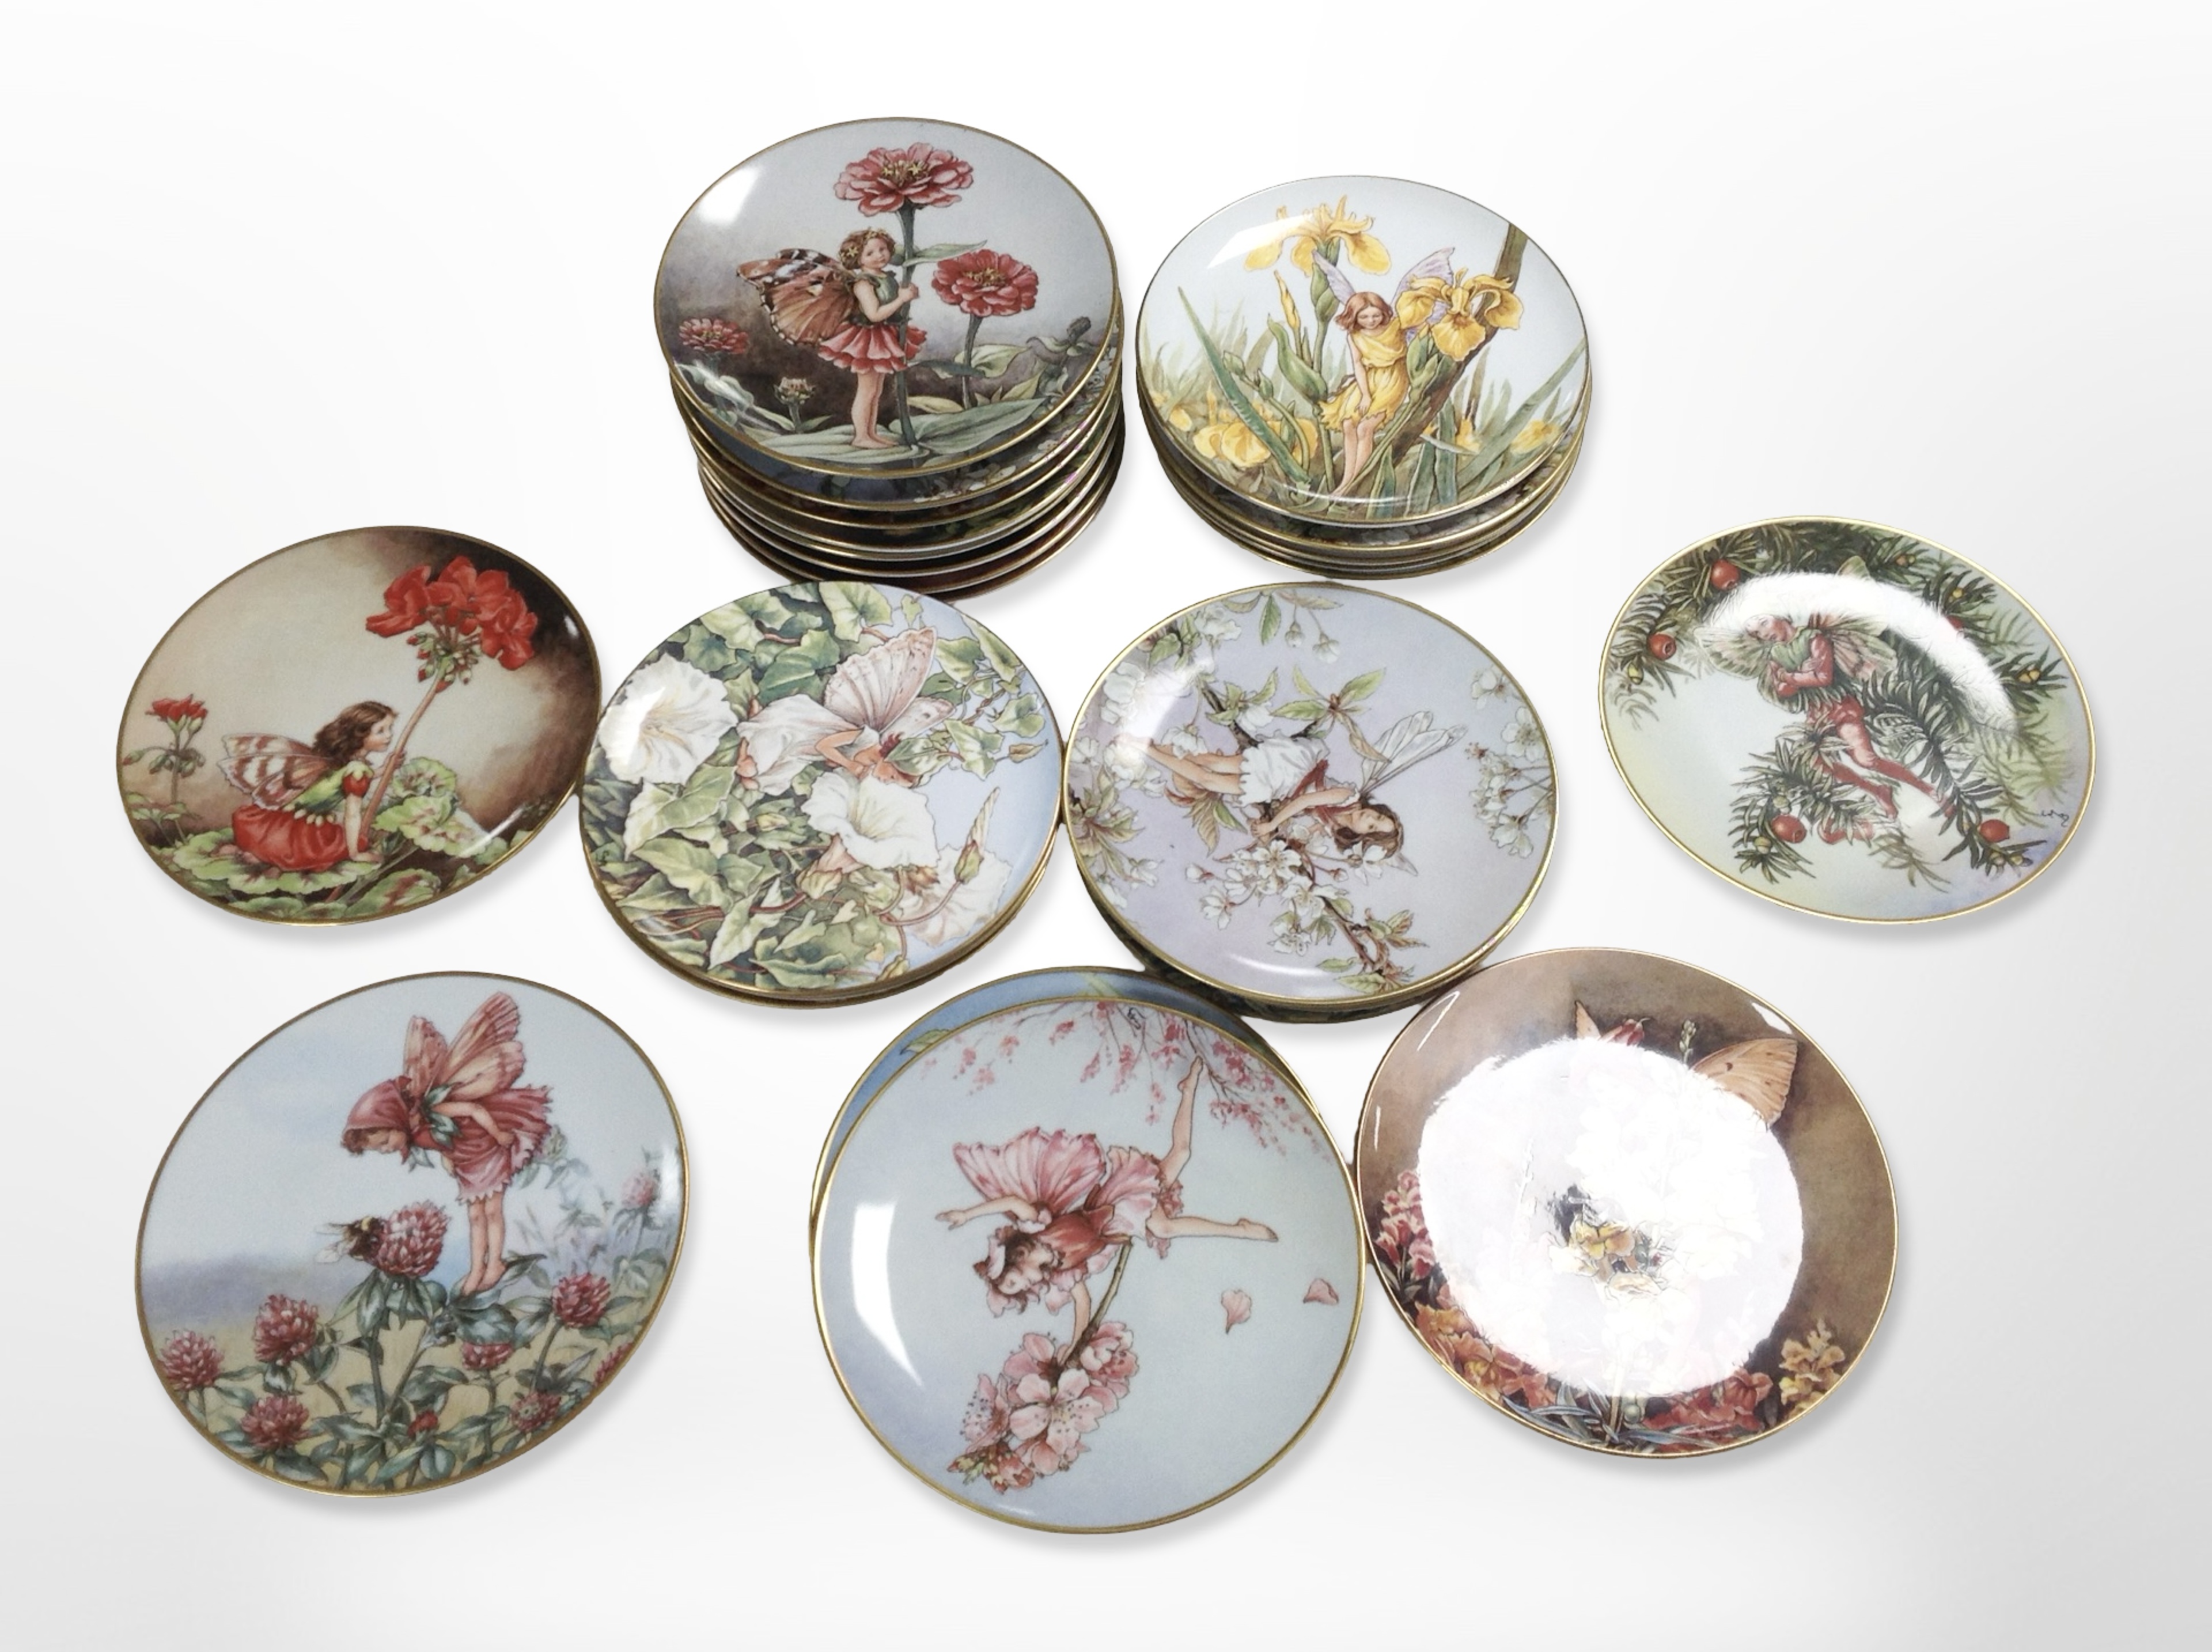 Approximately 26 Border Fine Bone China collector's plates depicting fairies.